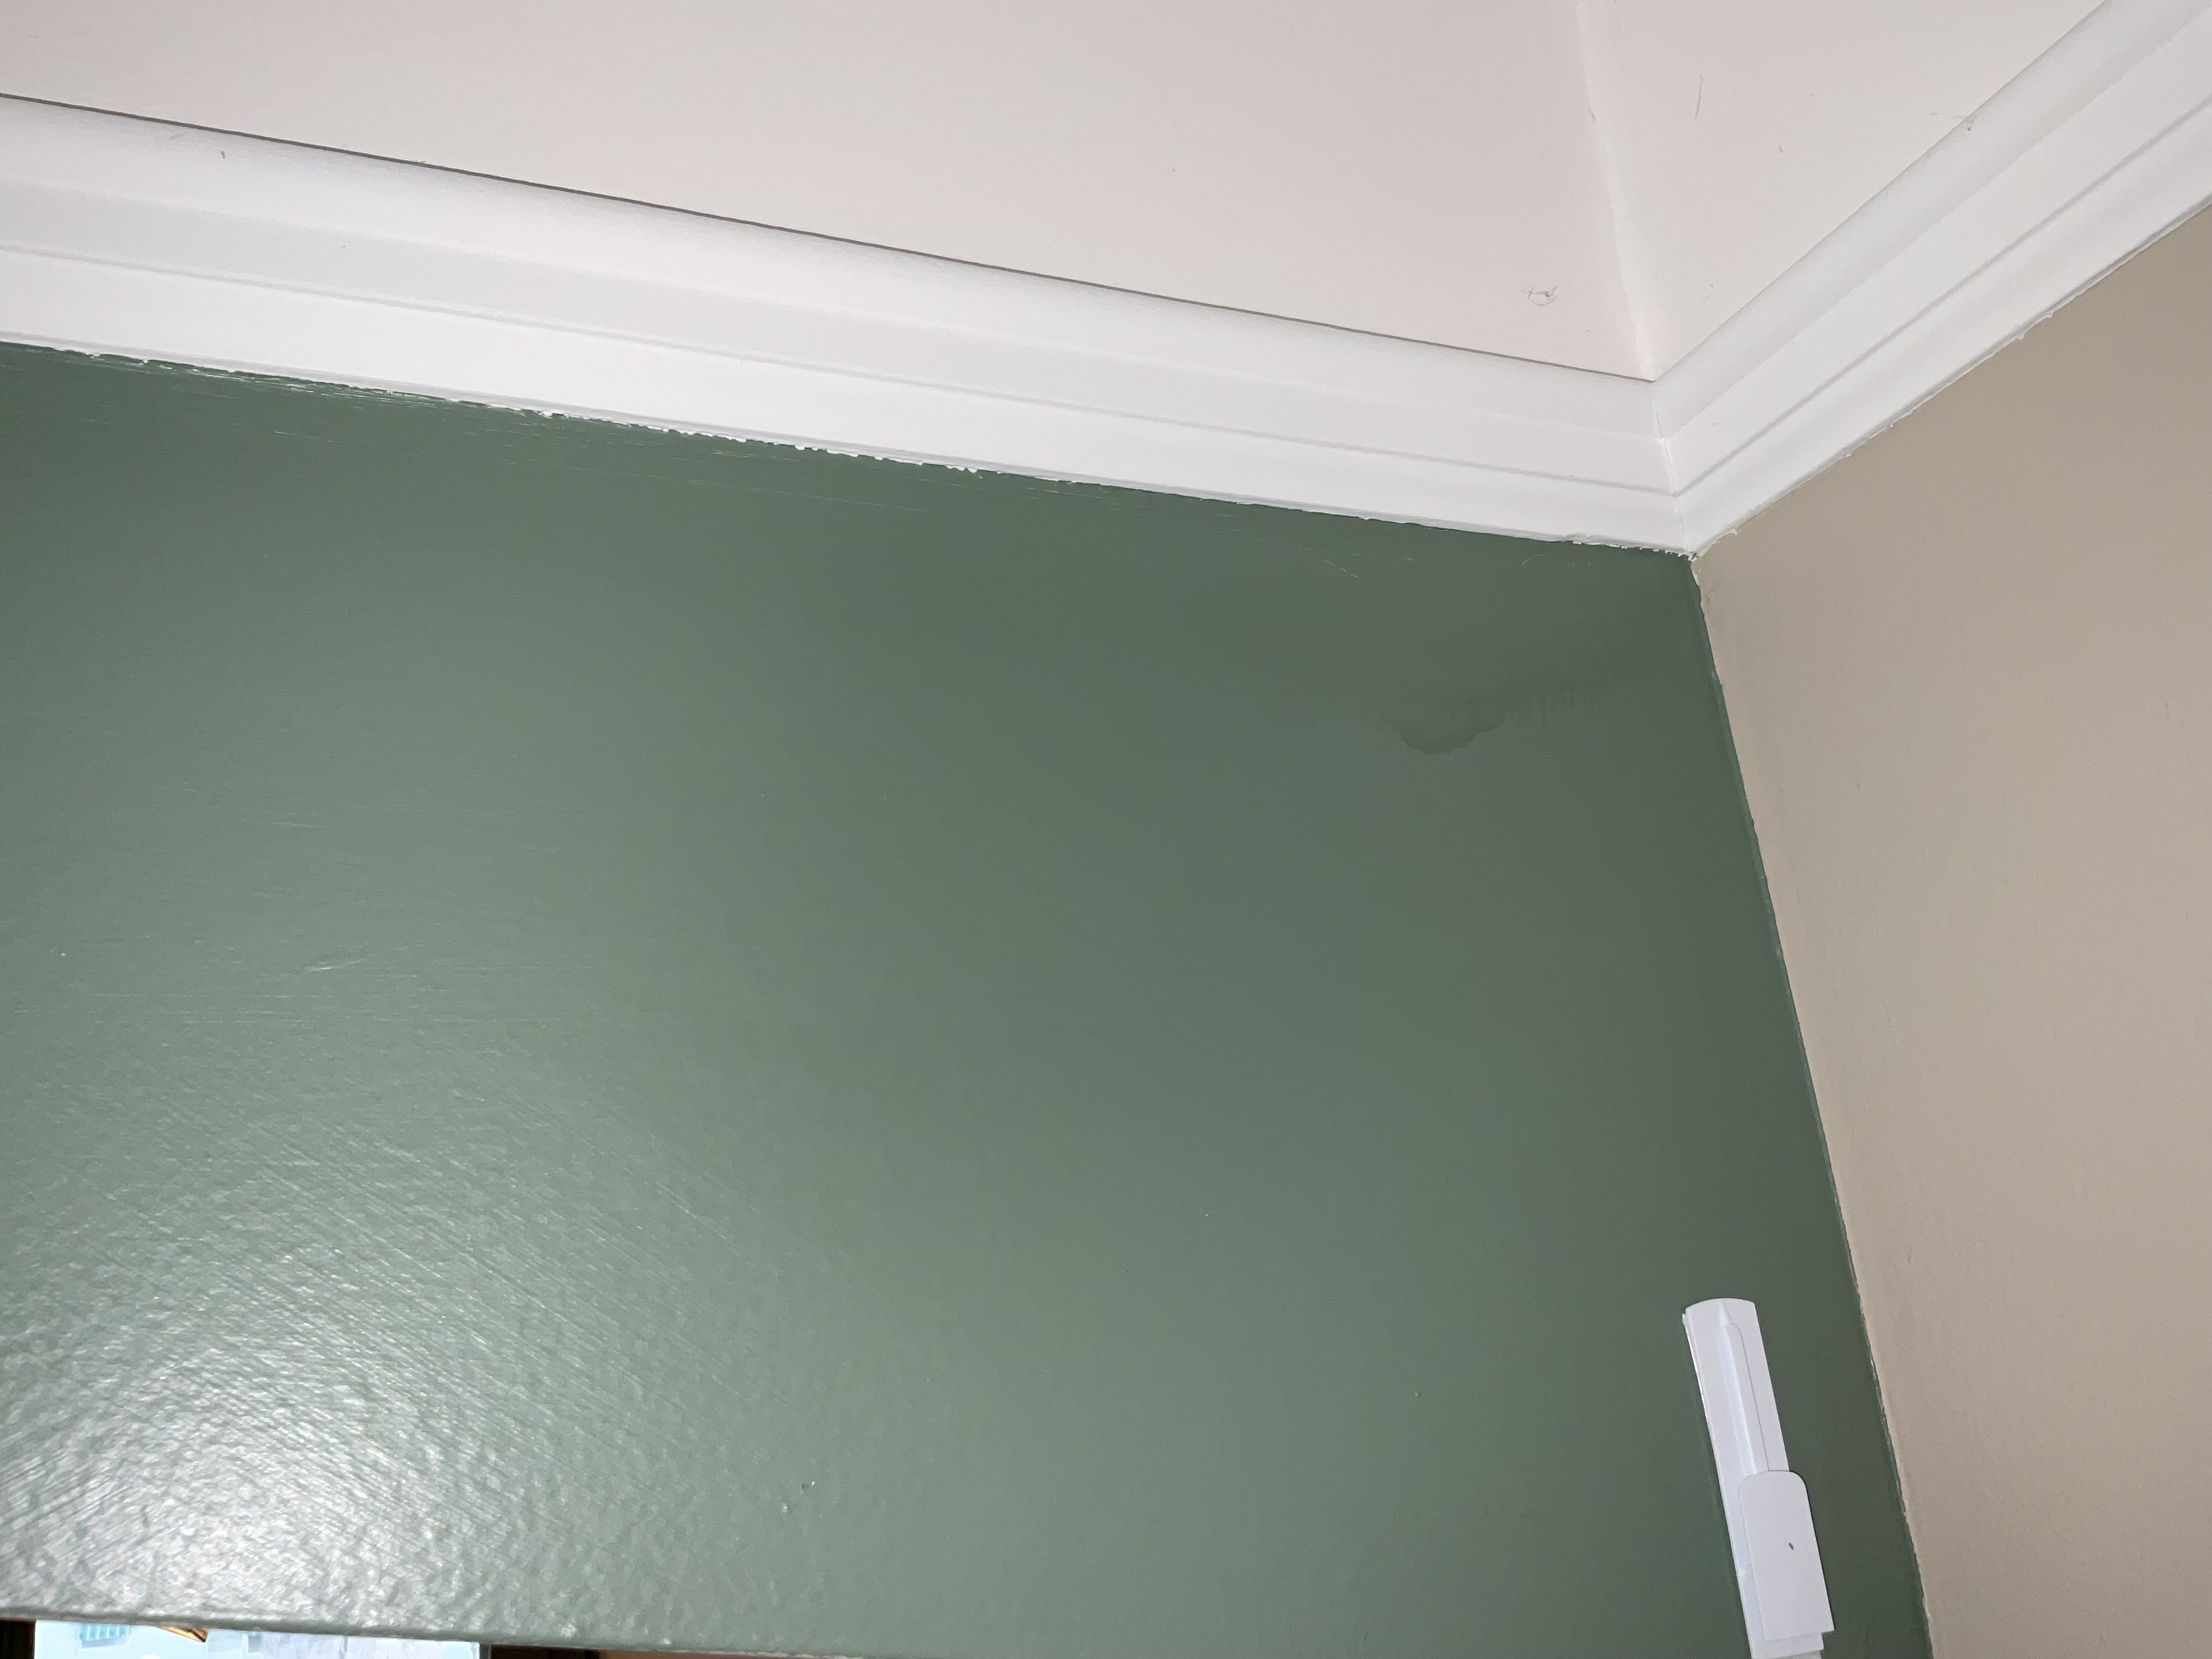 Deep green colored wall with white trim and white paint bleeding onto green wall.